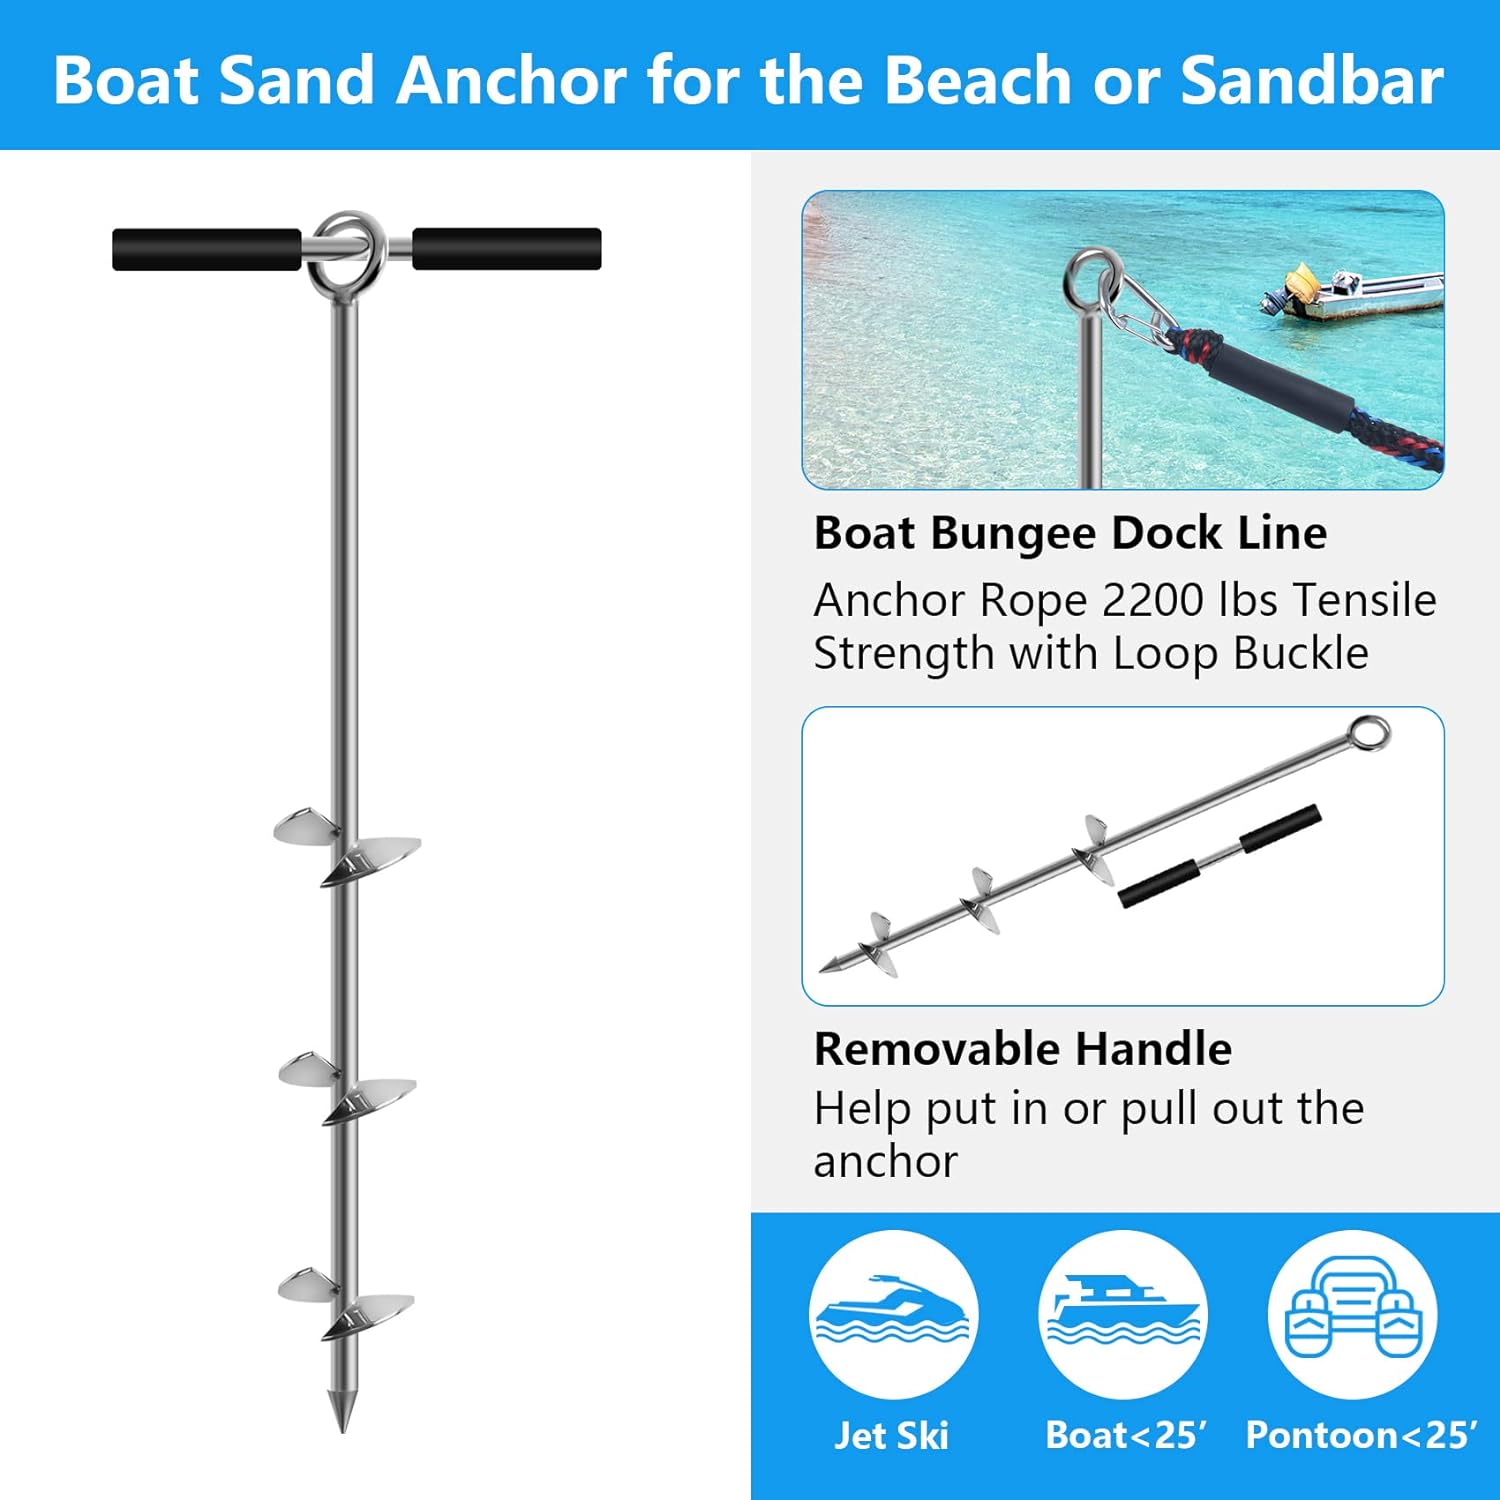 Sand Anchor,Boat Screw Anchor with Removable Handle,Boat Sand Anchor with Bungee Dock Line，Shallow Water Anchor for Boats,Jet Ski,PWC,Pontoon,Kayak,Canoe